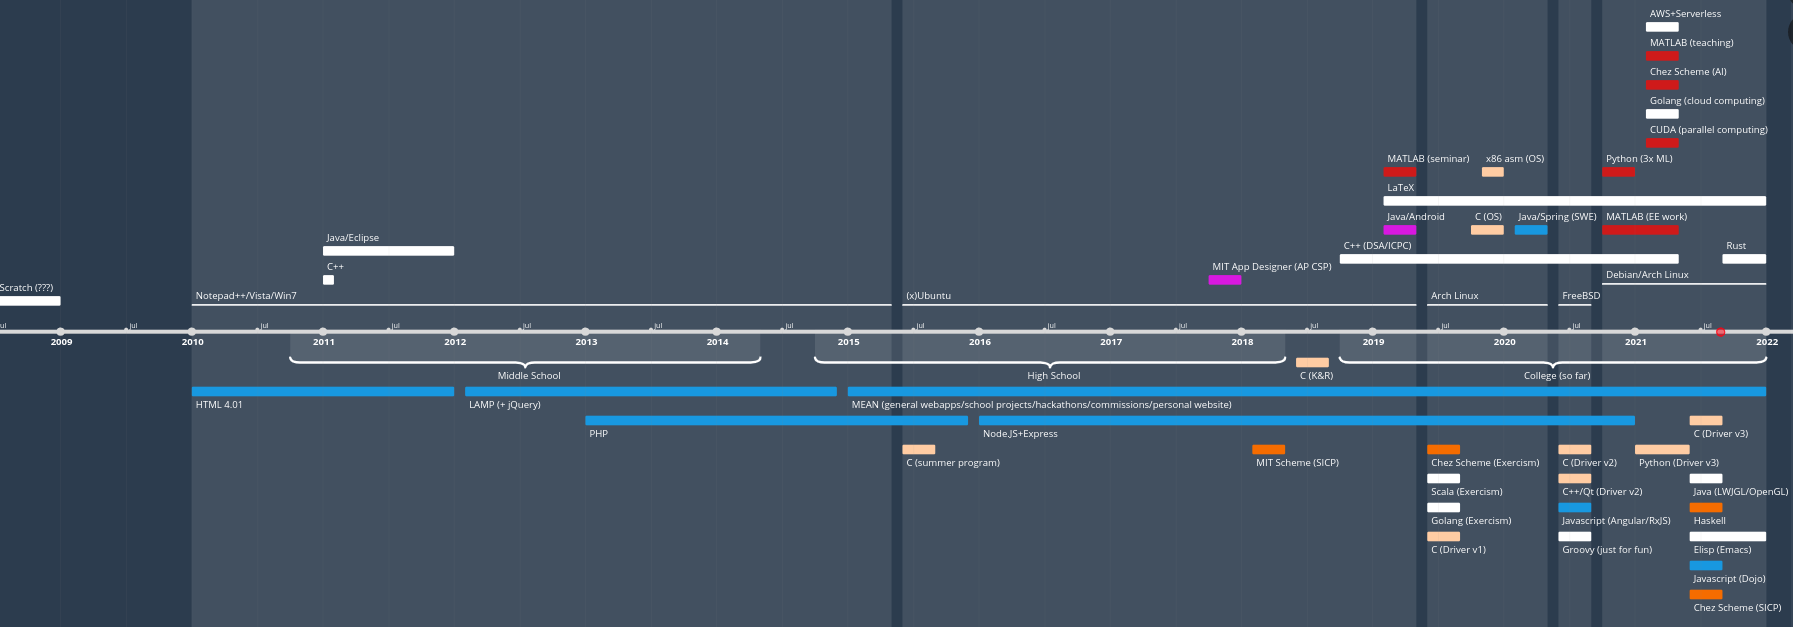 Timeline of programming languages. Click to open in a new tab.